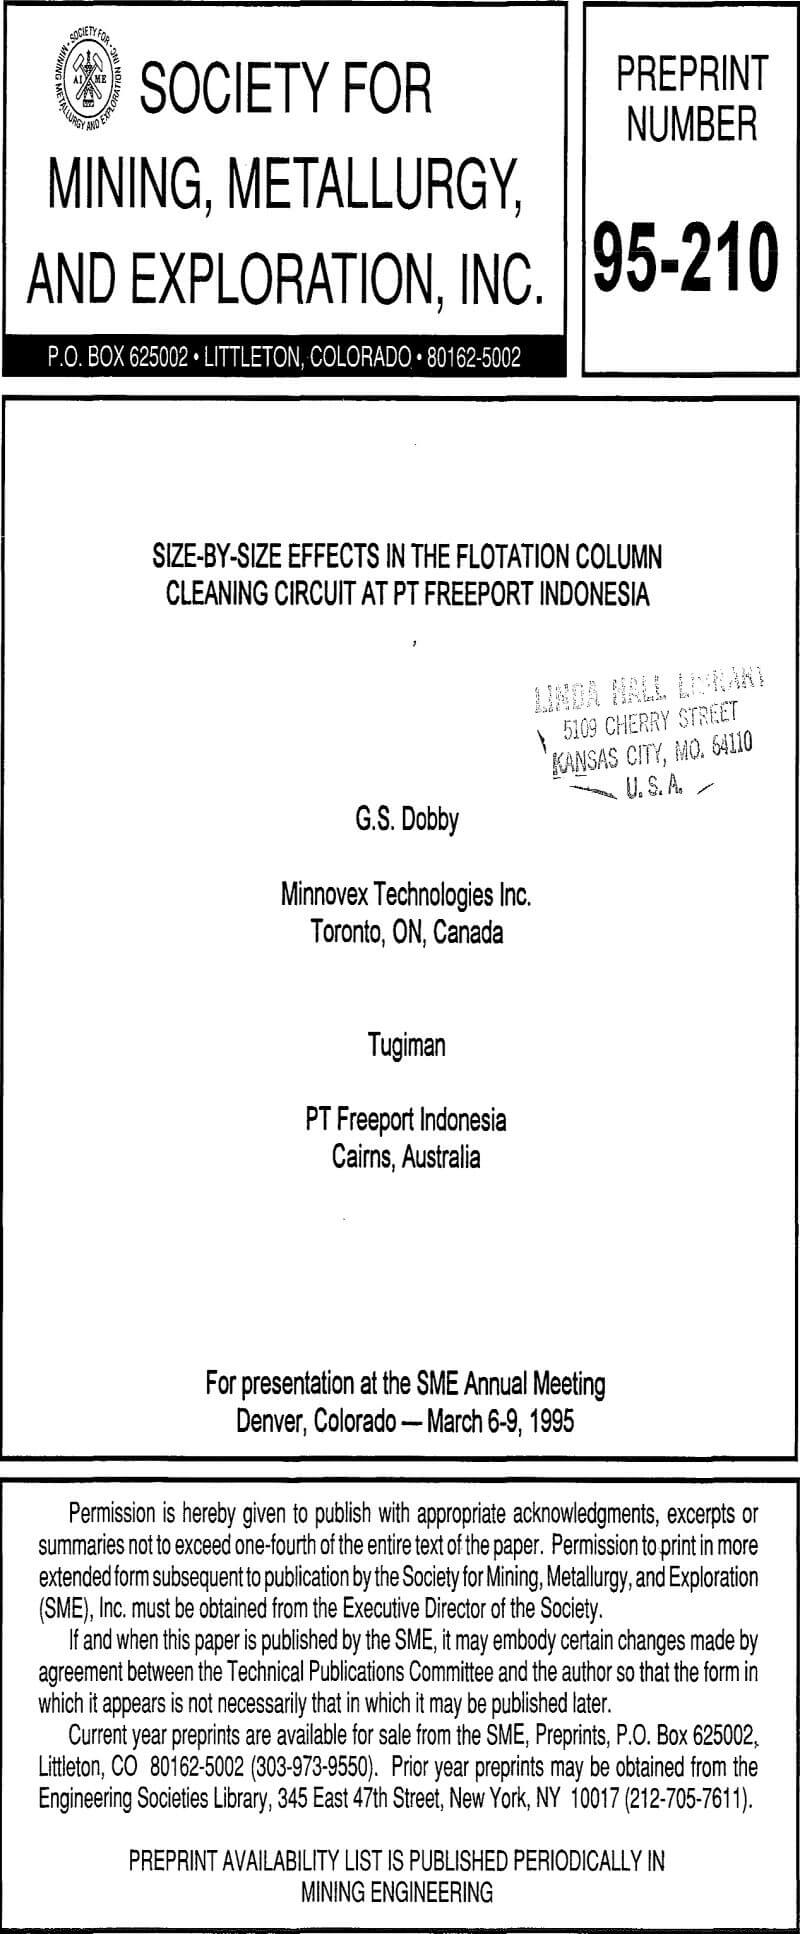 size-by-size effects in the flotation column cleaning circuit at pt freeport indonesia